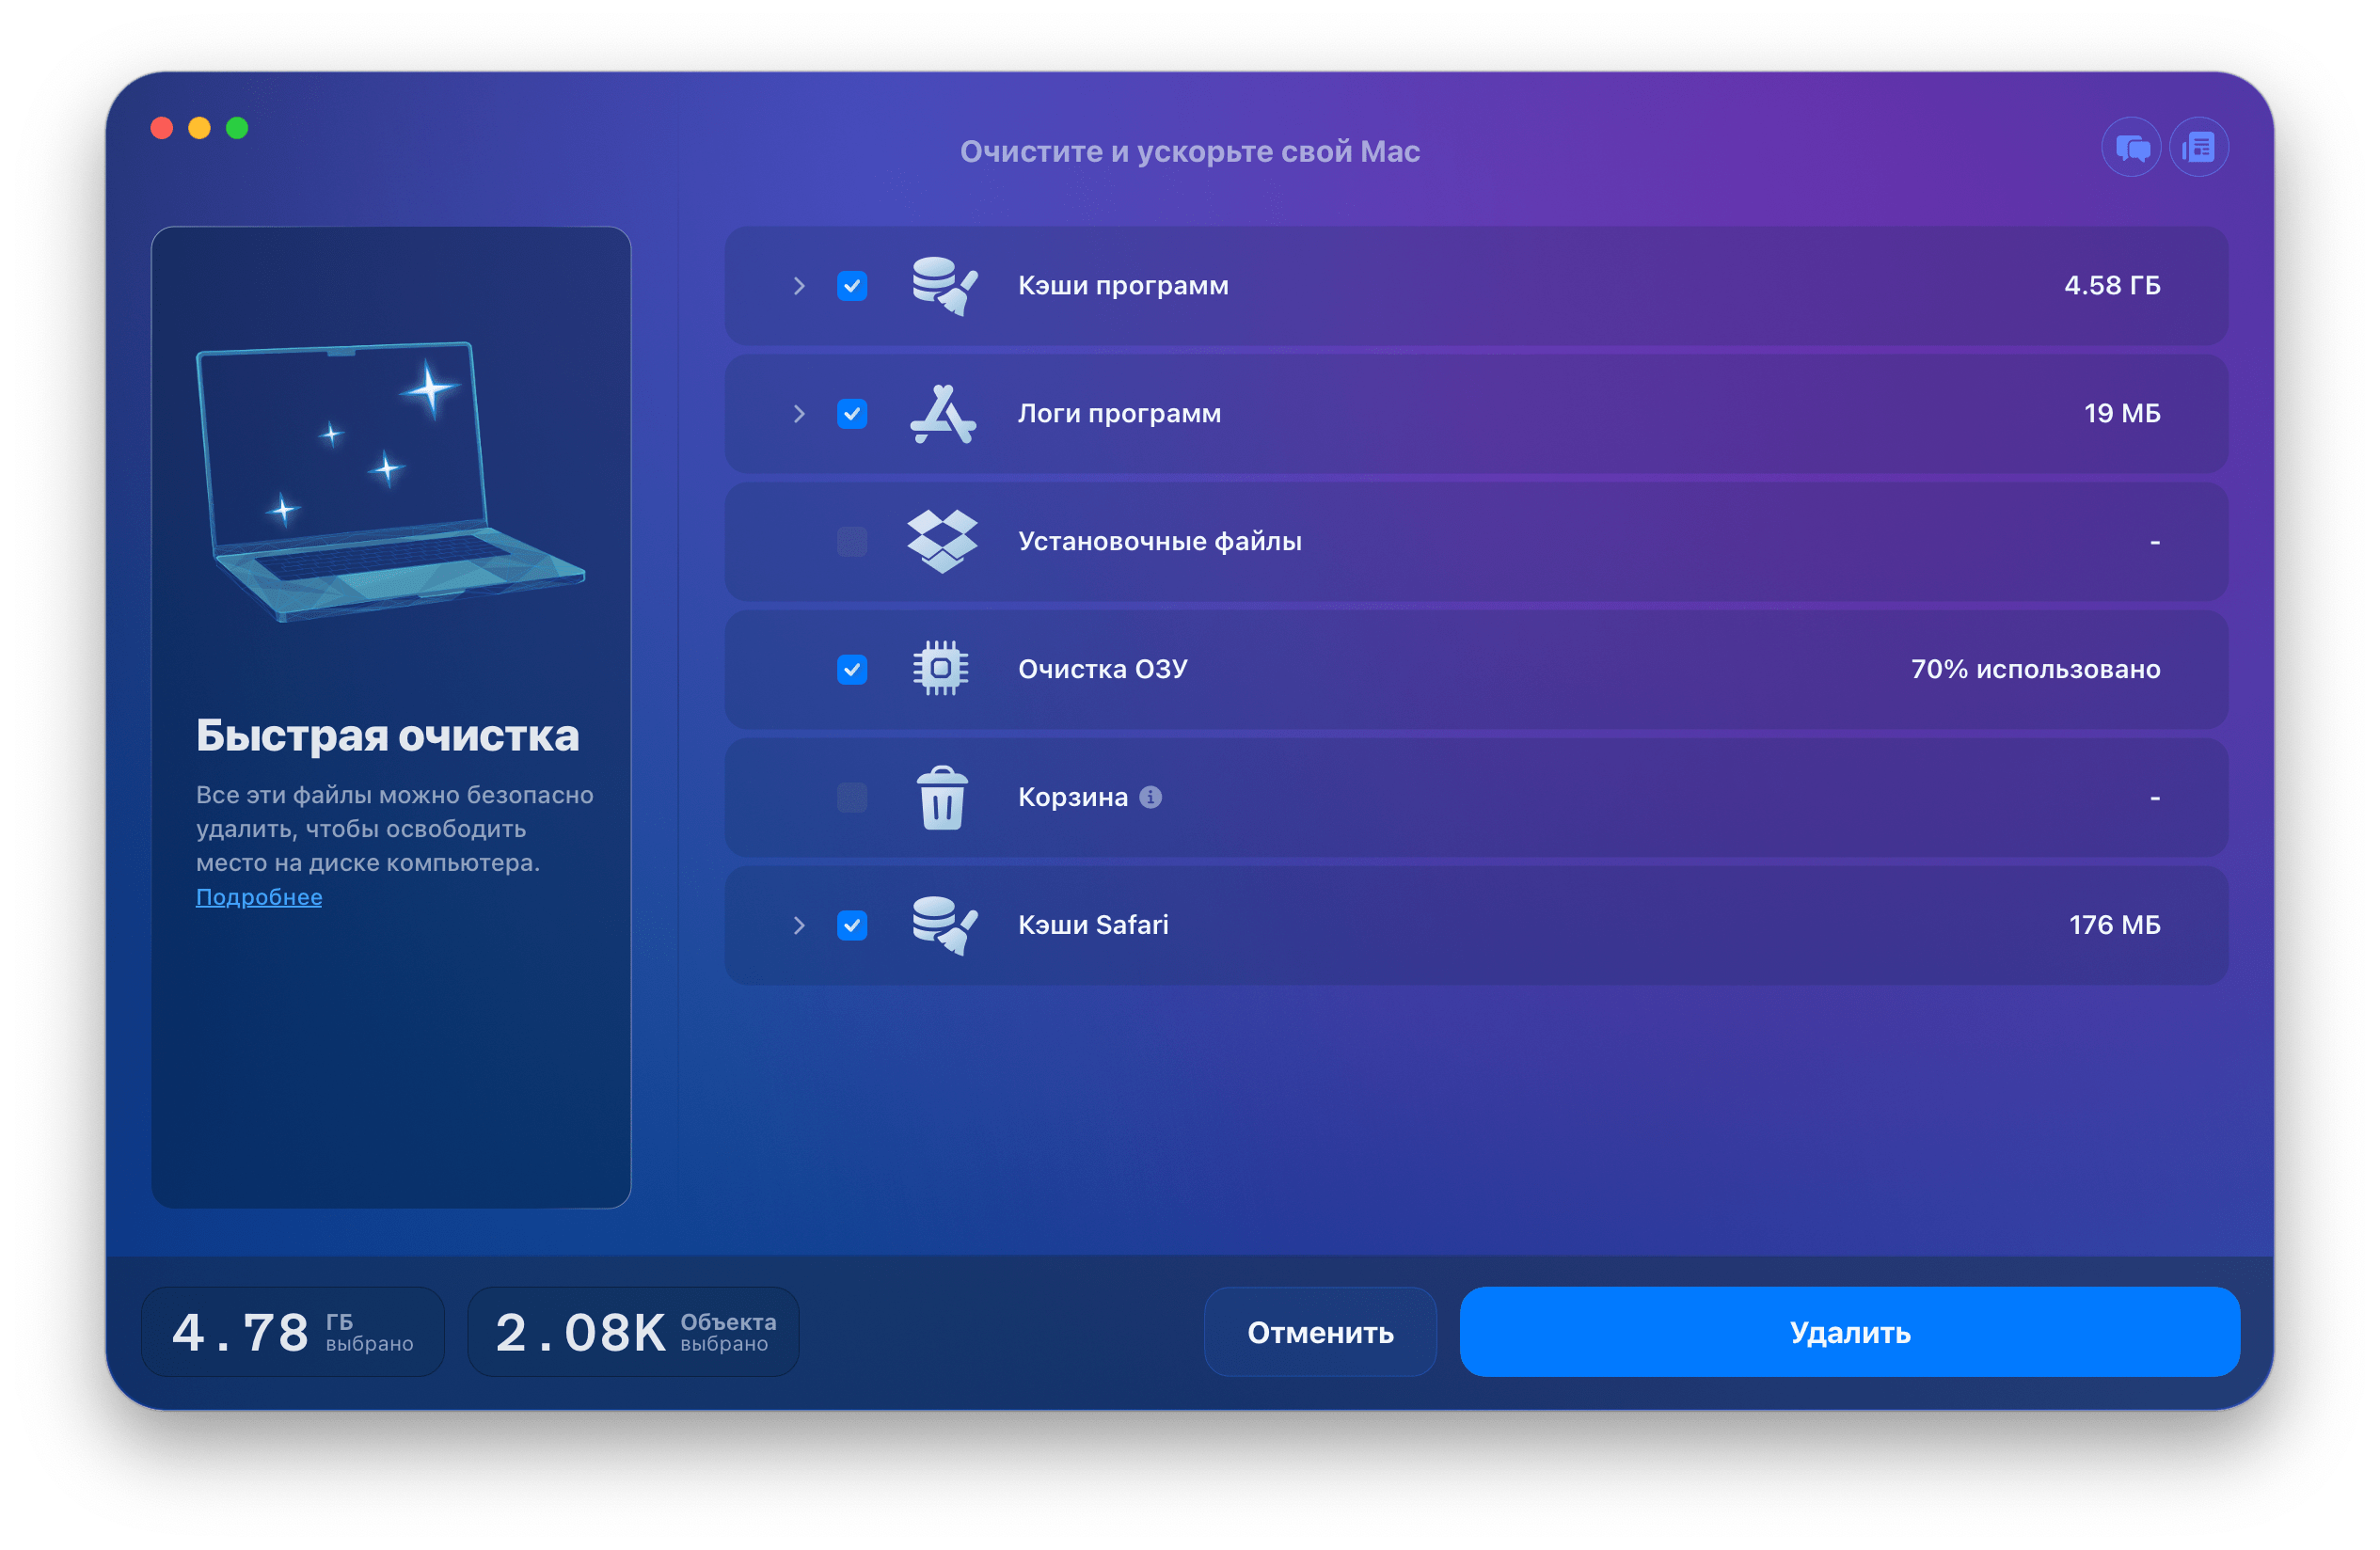 MacCleaner Pro showing the options in the fast cleanup mode